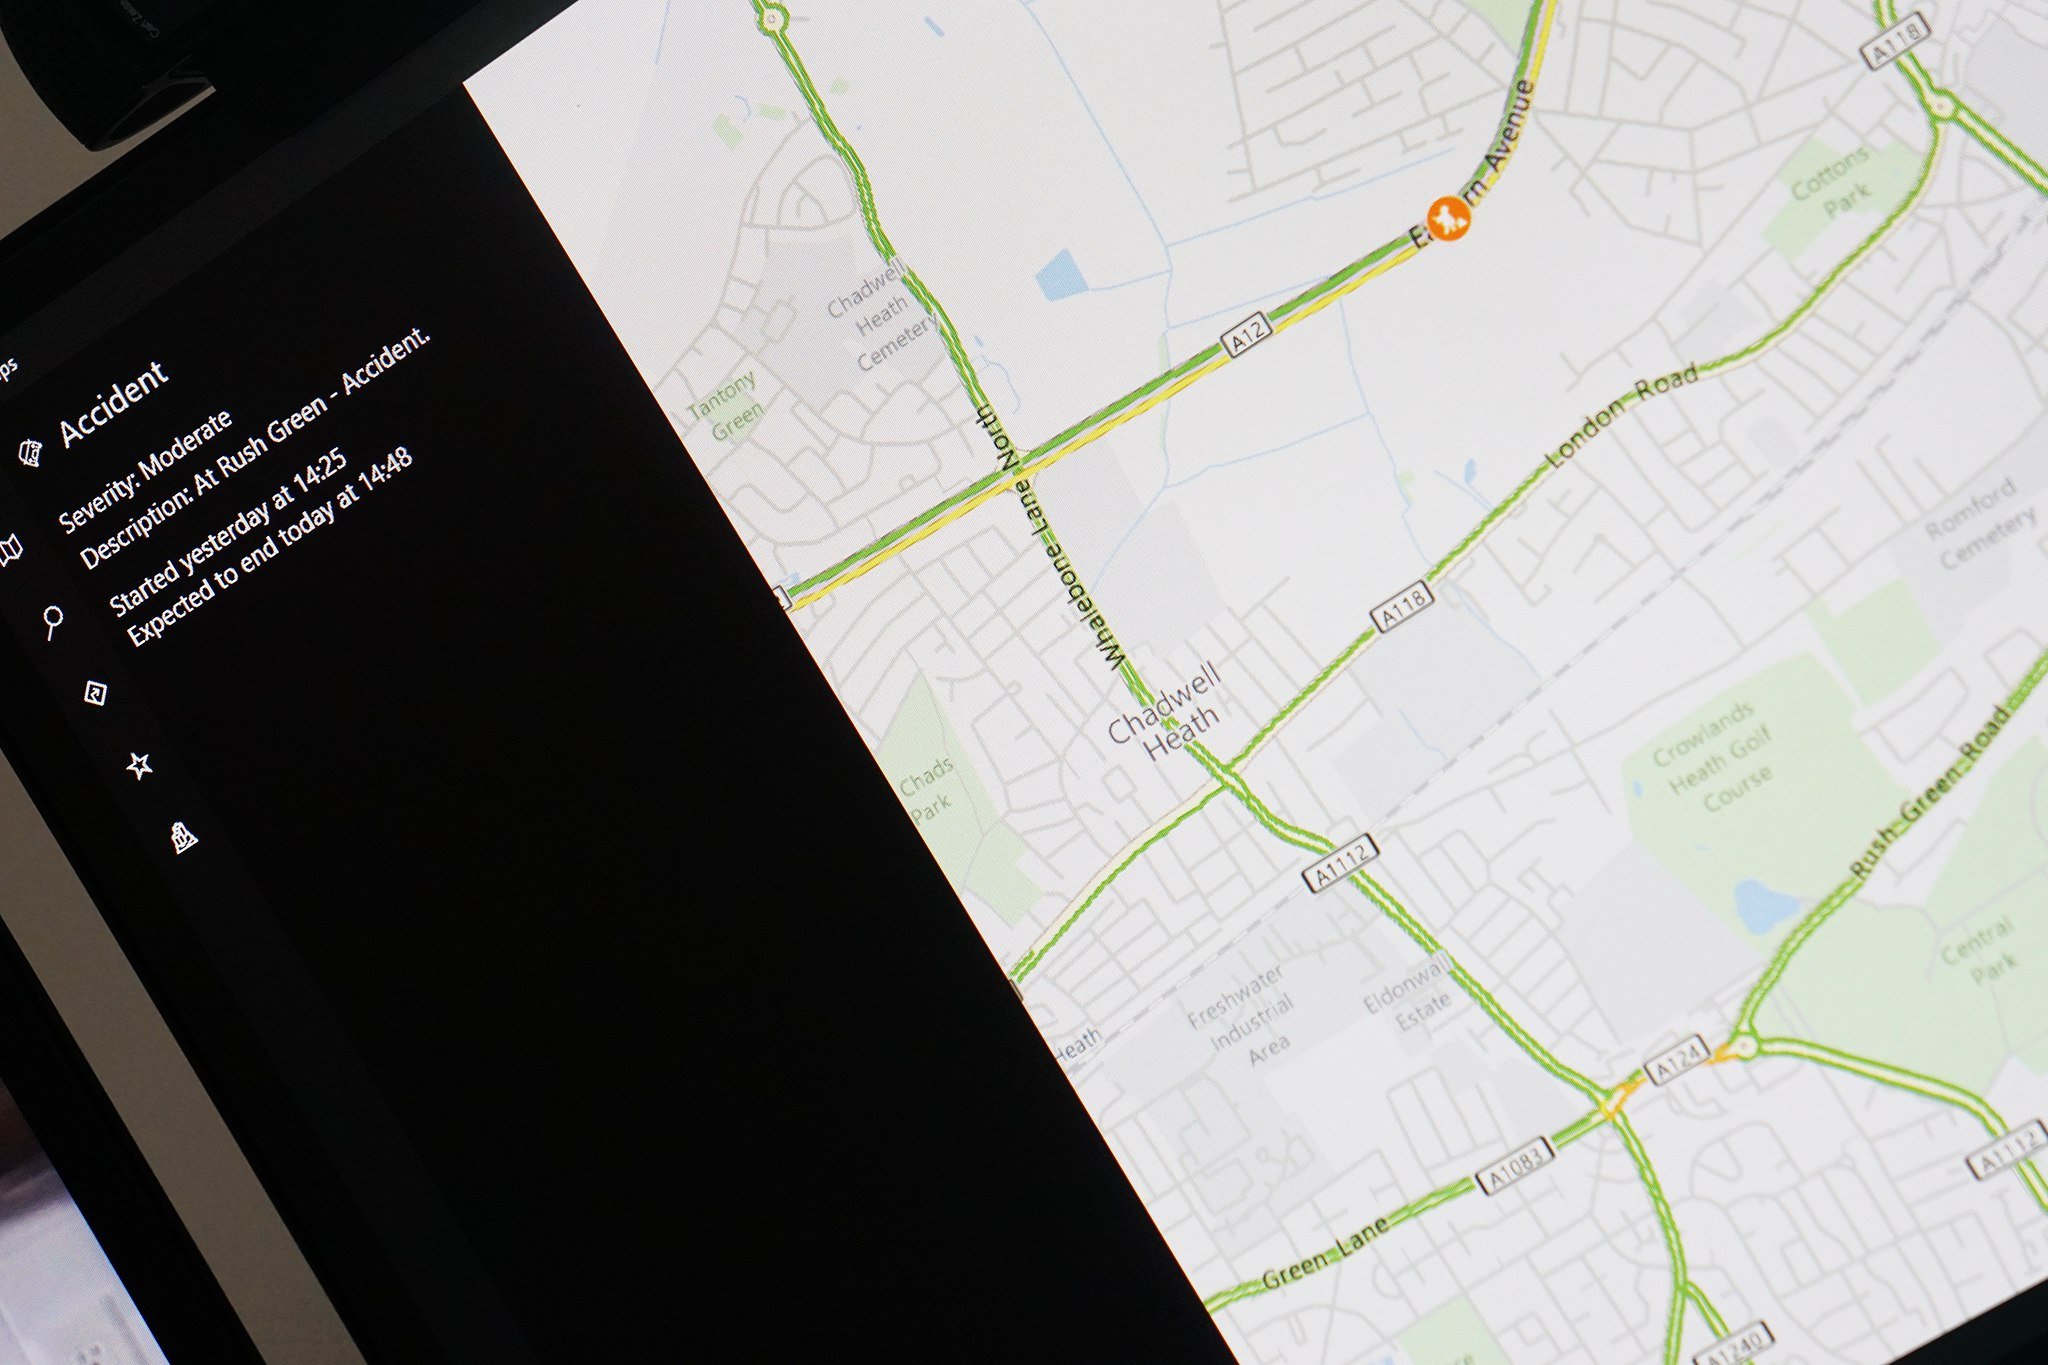 Windows Maps gets lane guidance and traffic cameras in latest update